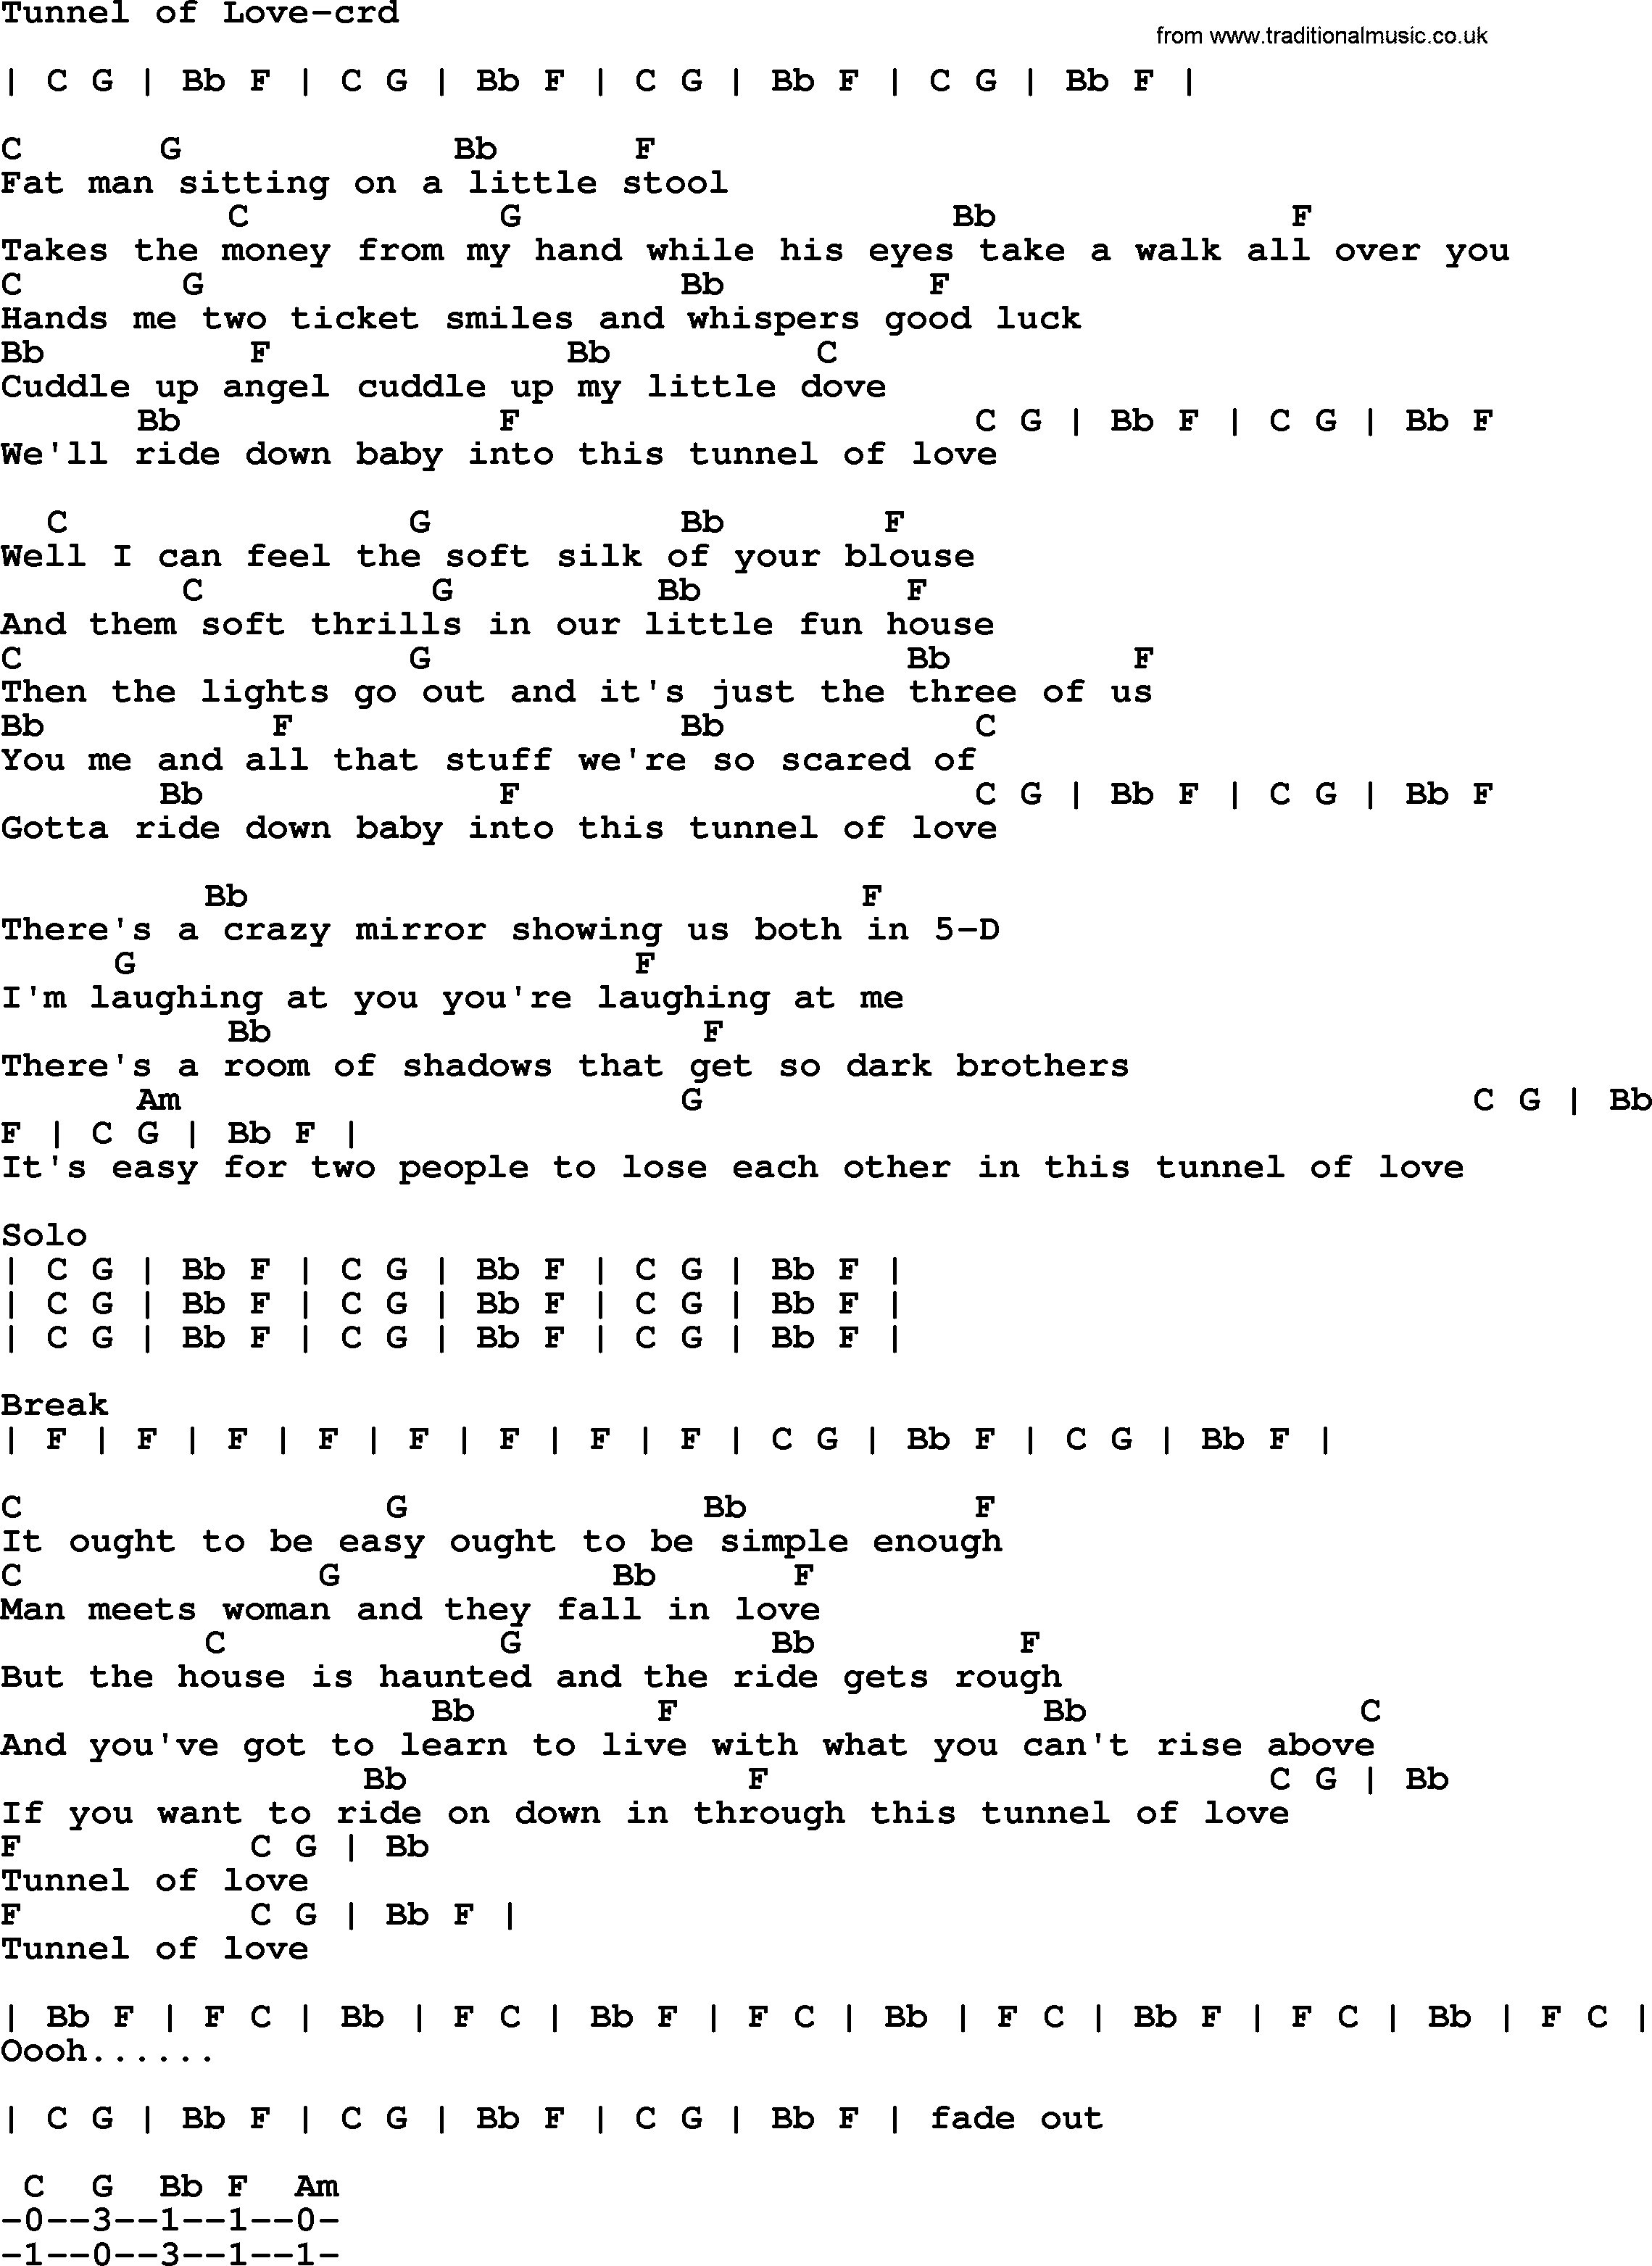 Bruce Springsteen song: Tunnel Of Love, lyrics and chords